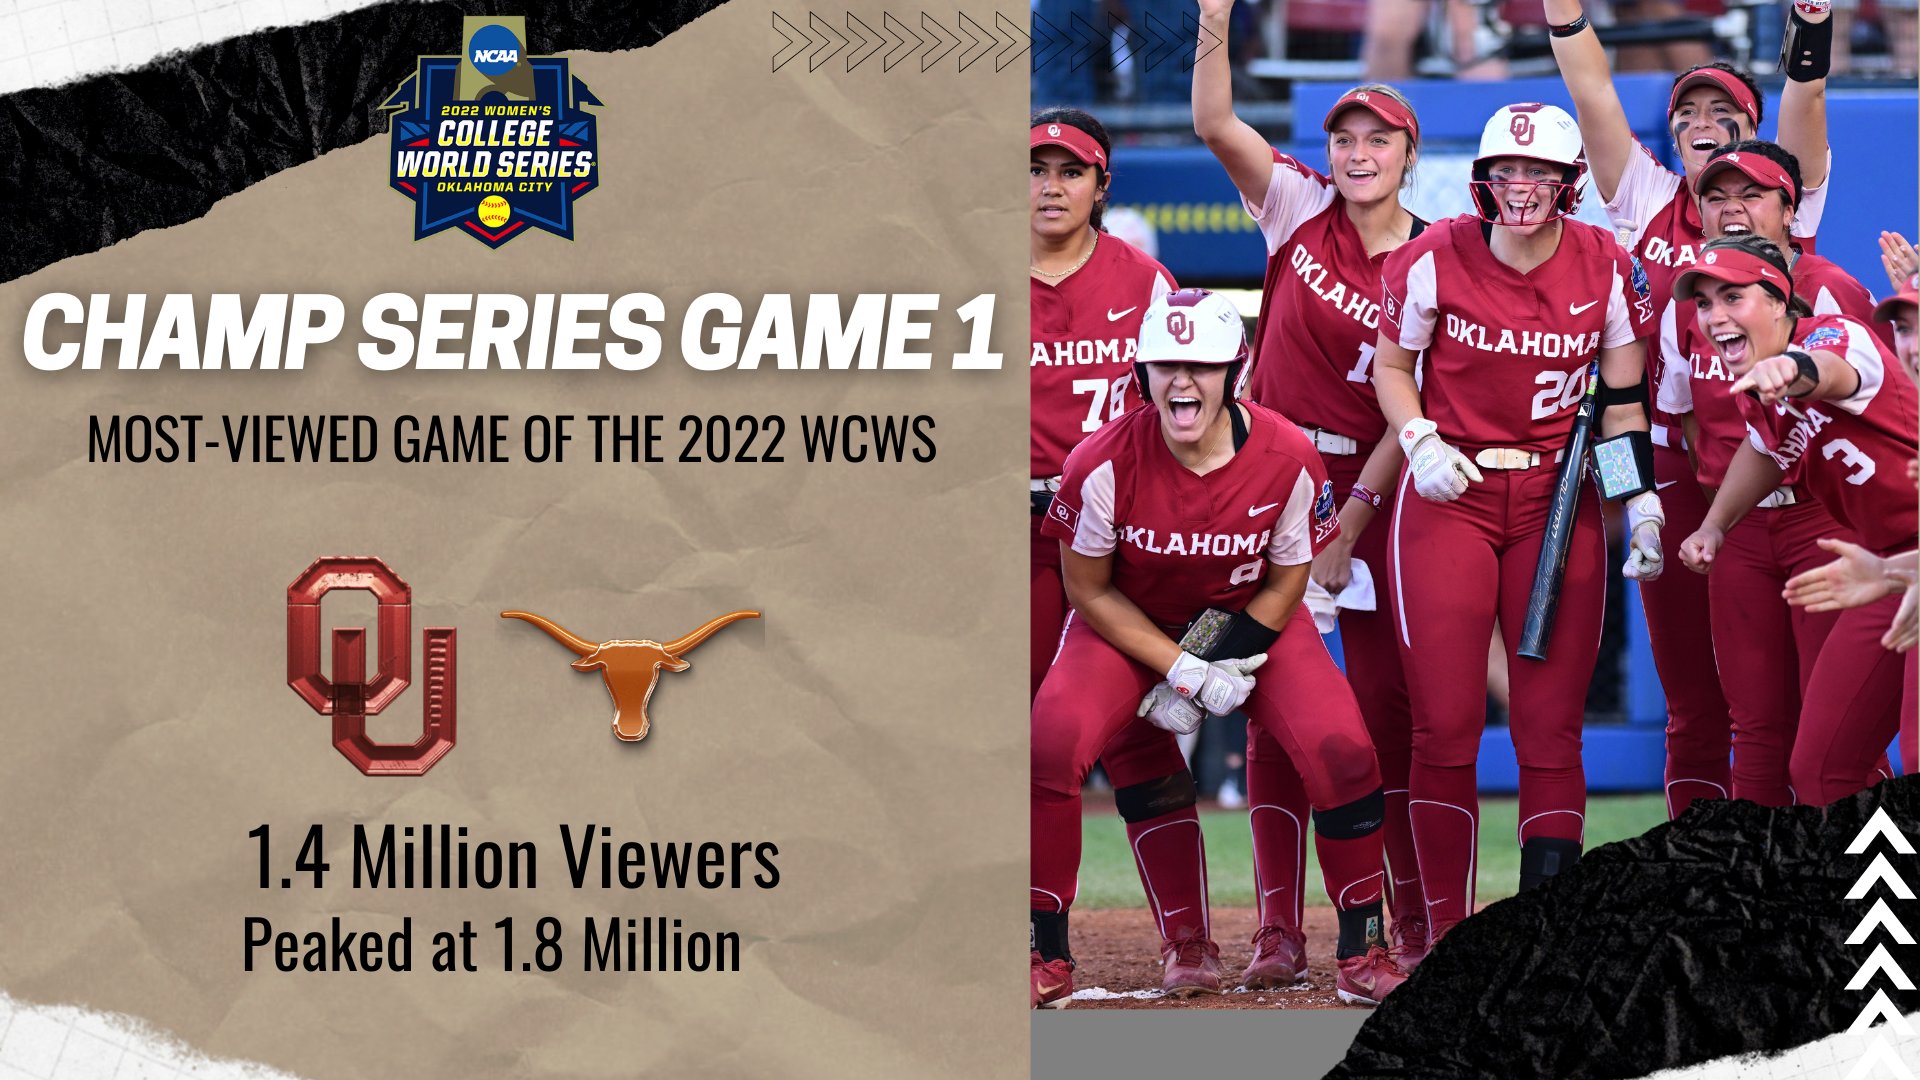 ESPN PR on Twitter "Wednesday's WCWS Champ Series Game 1 featuring